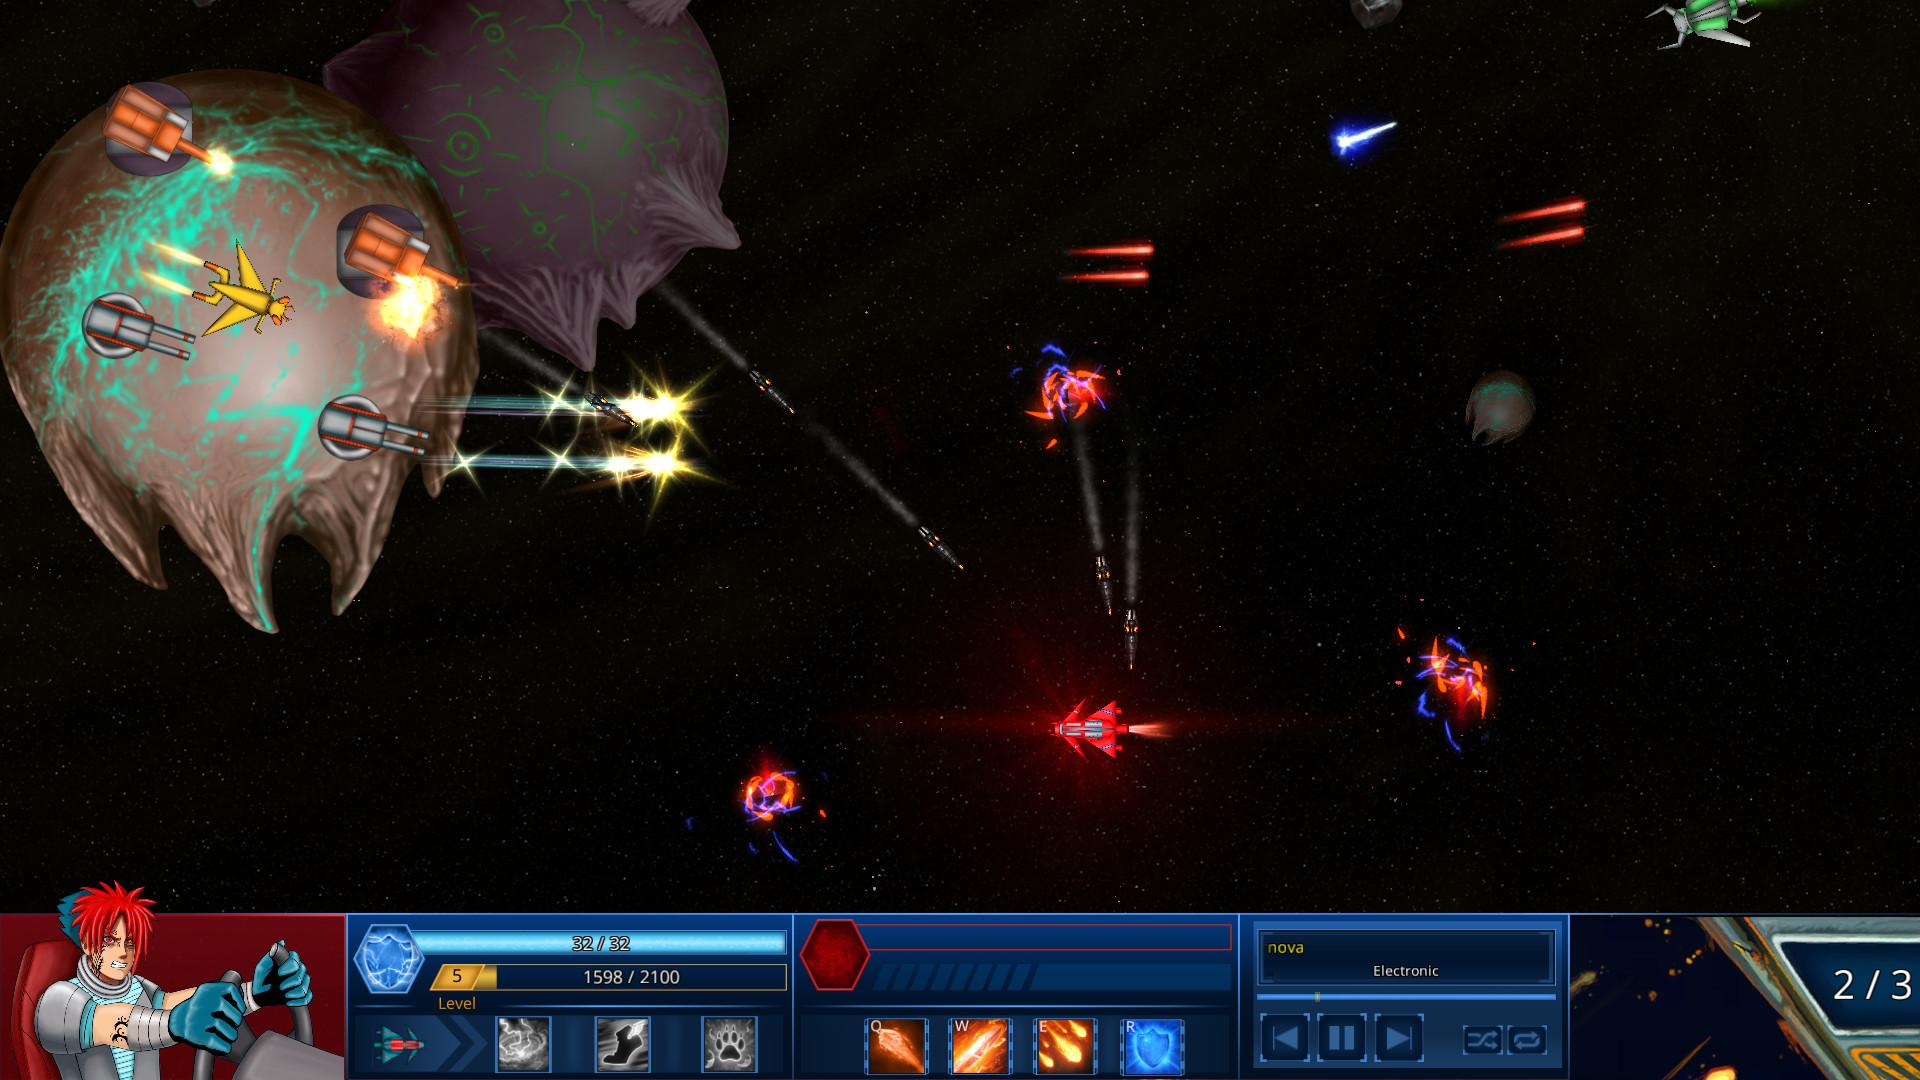 Screenshot №4 from game Survive in Space